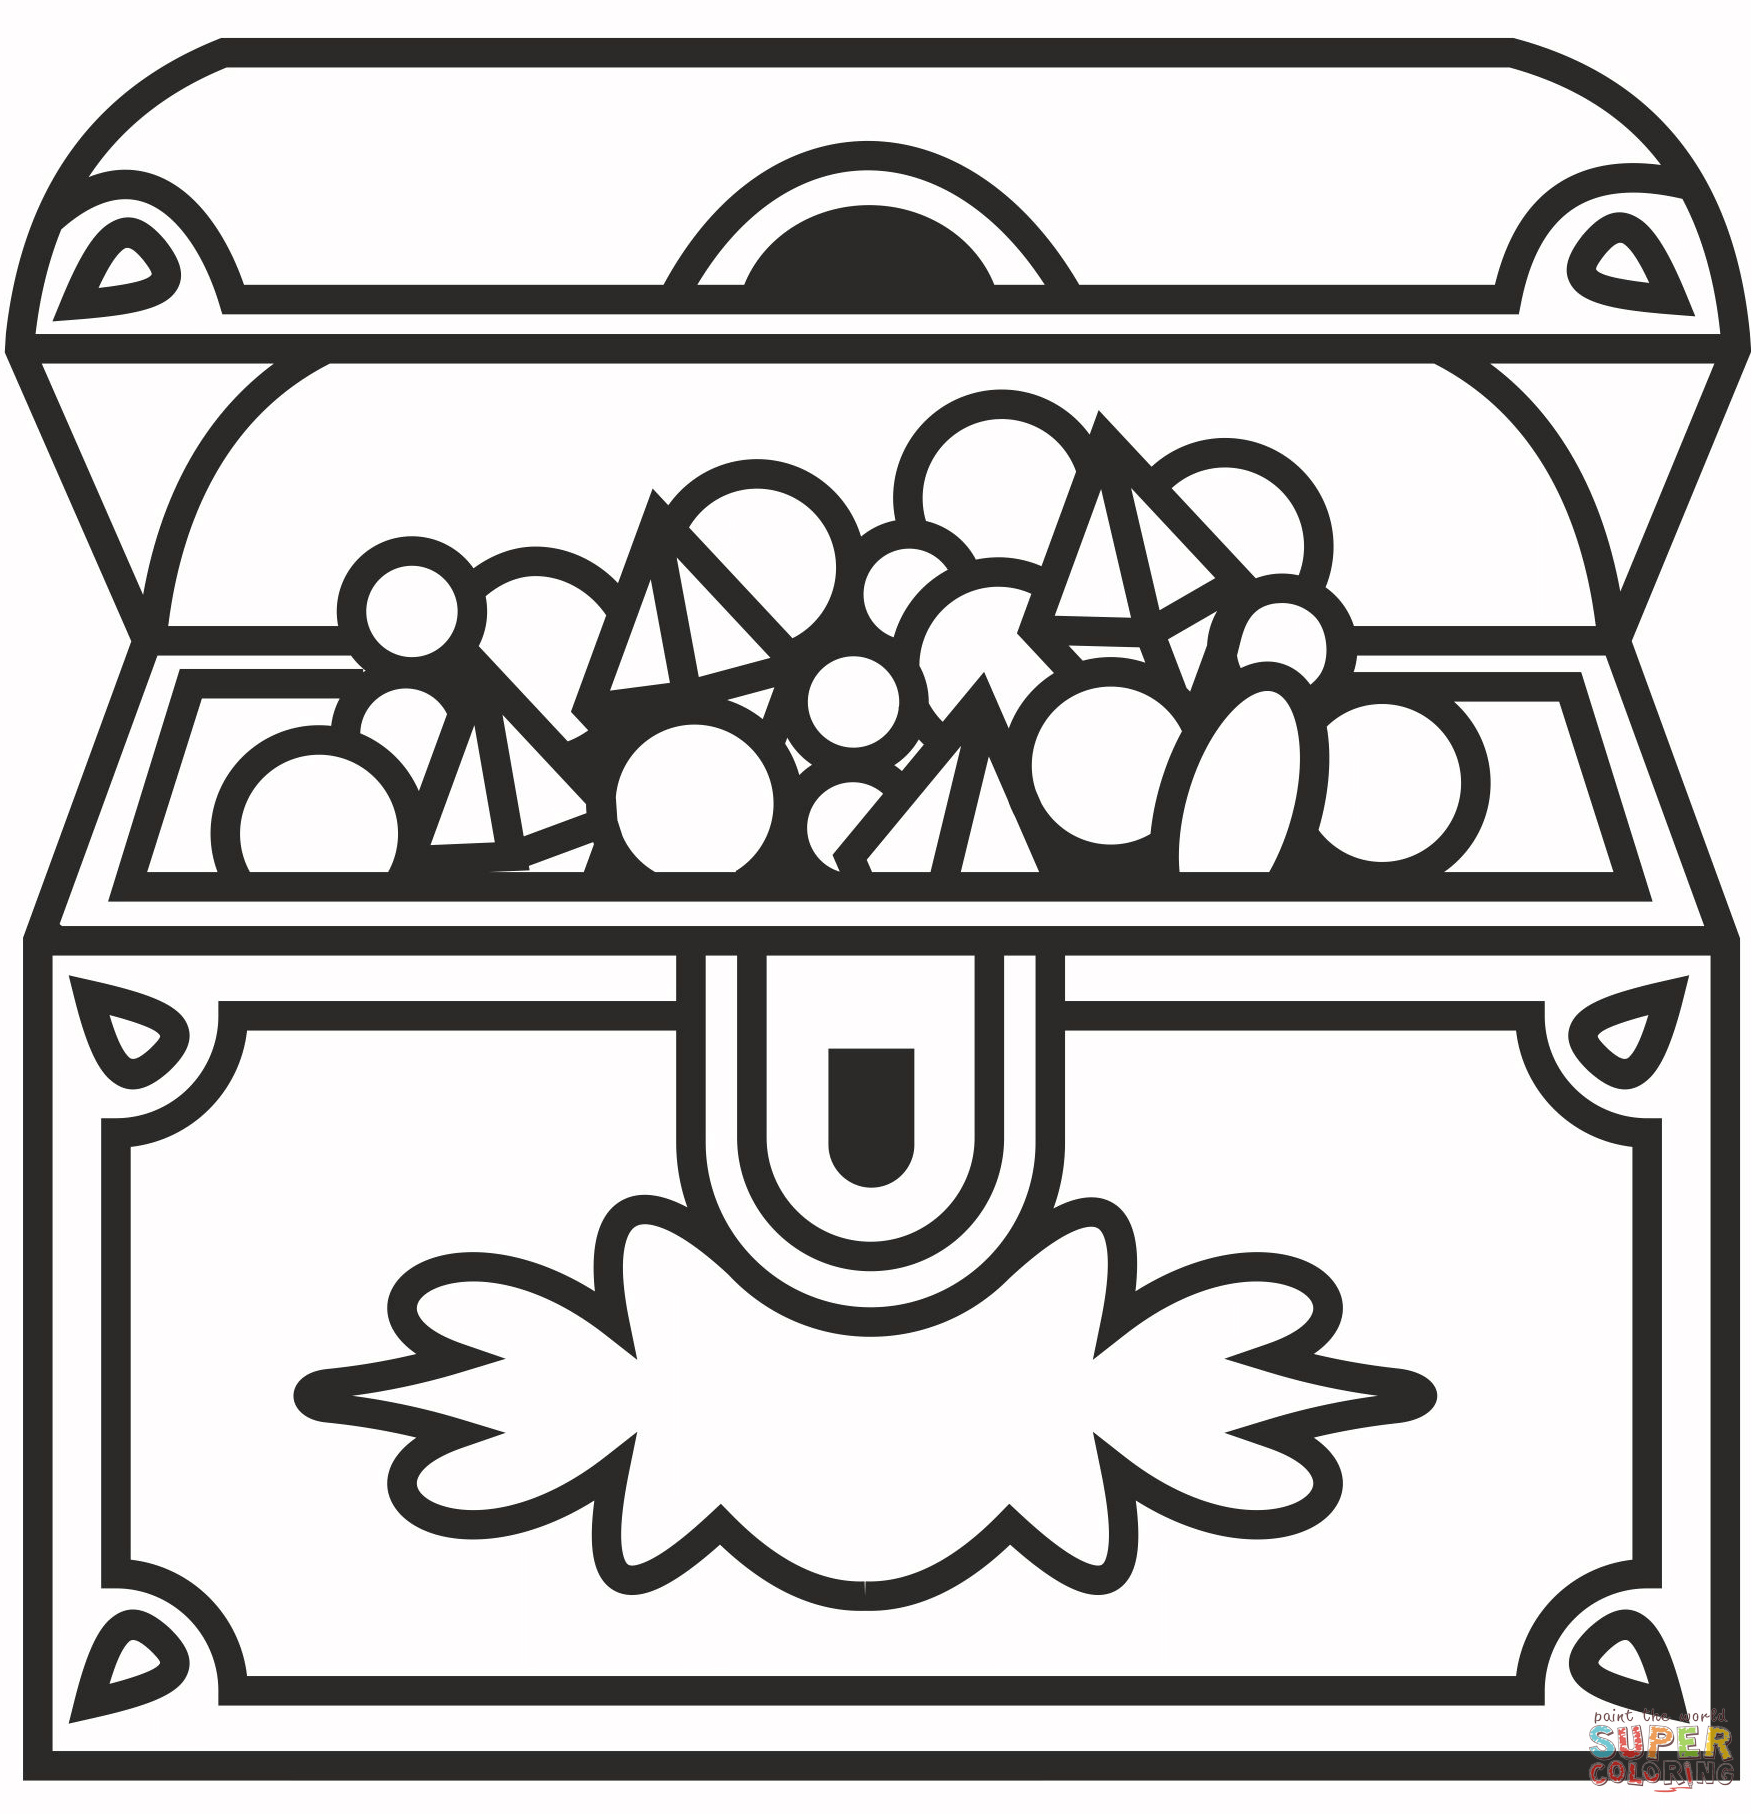 Treasure chest coloring page free printable coloring pages